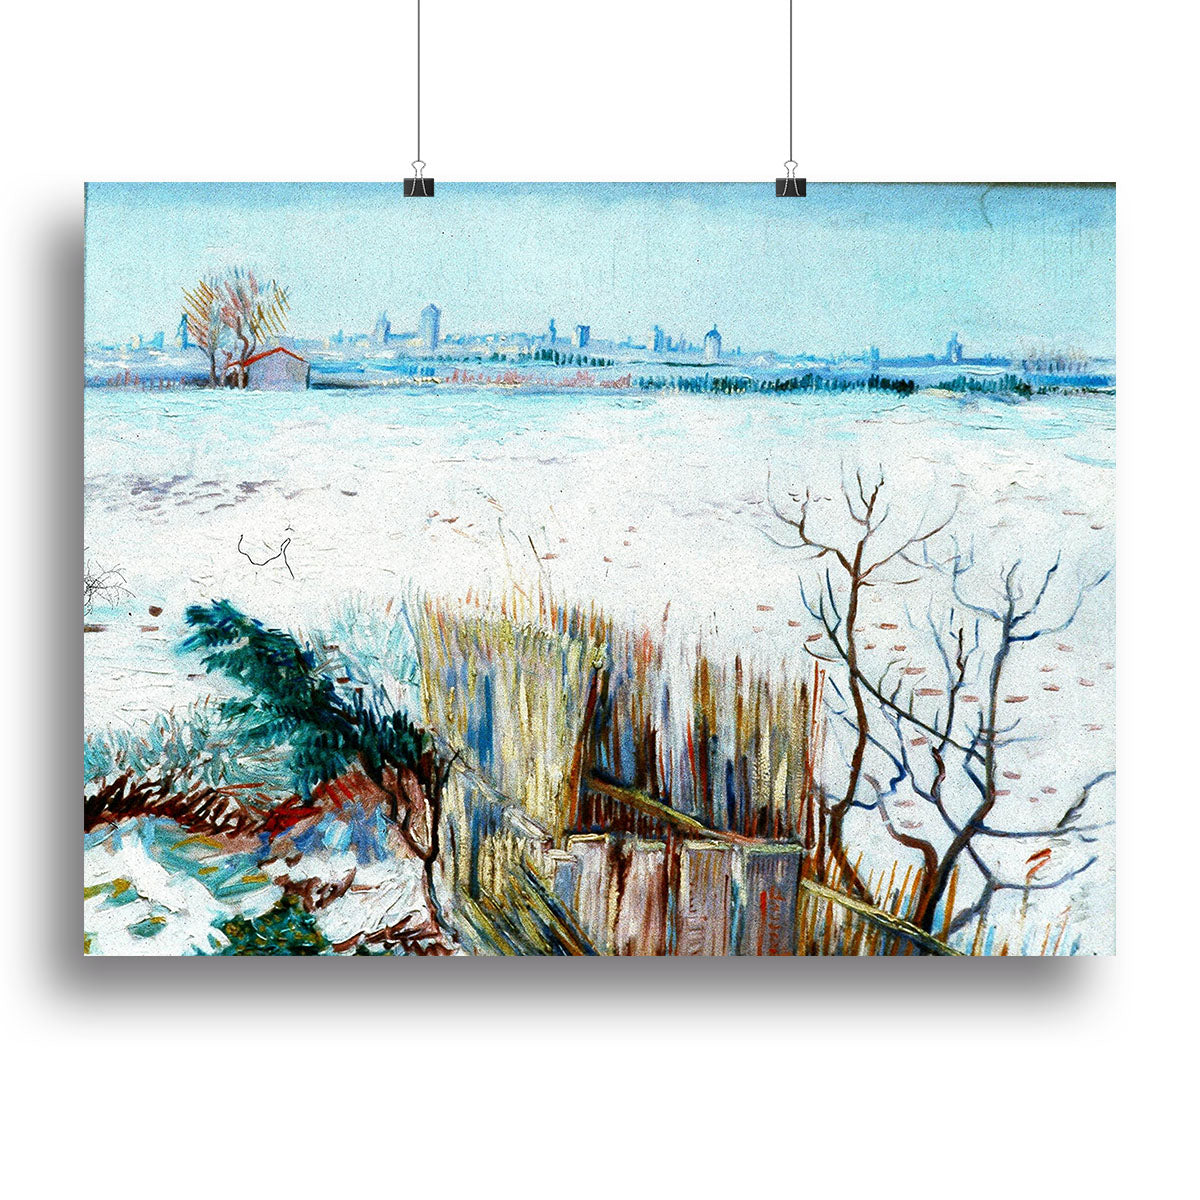 Snowy Landscape with Arles in the Background by Van Gogh Canvas Print or Poster - Canvas Art Rocks - 2